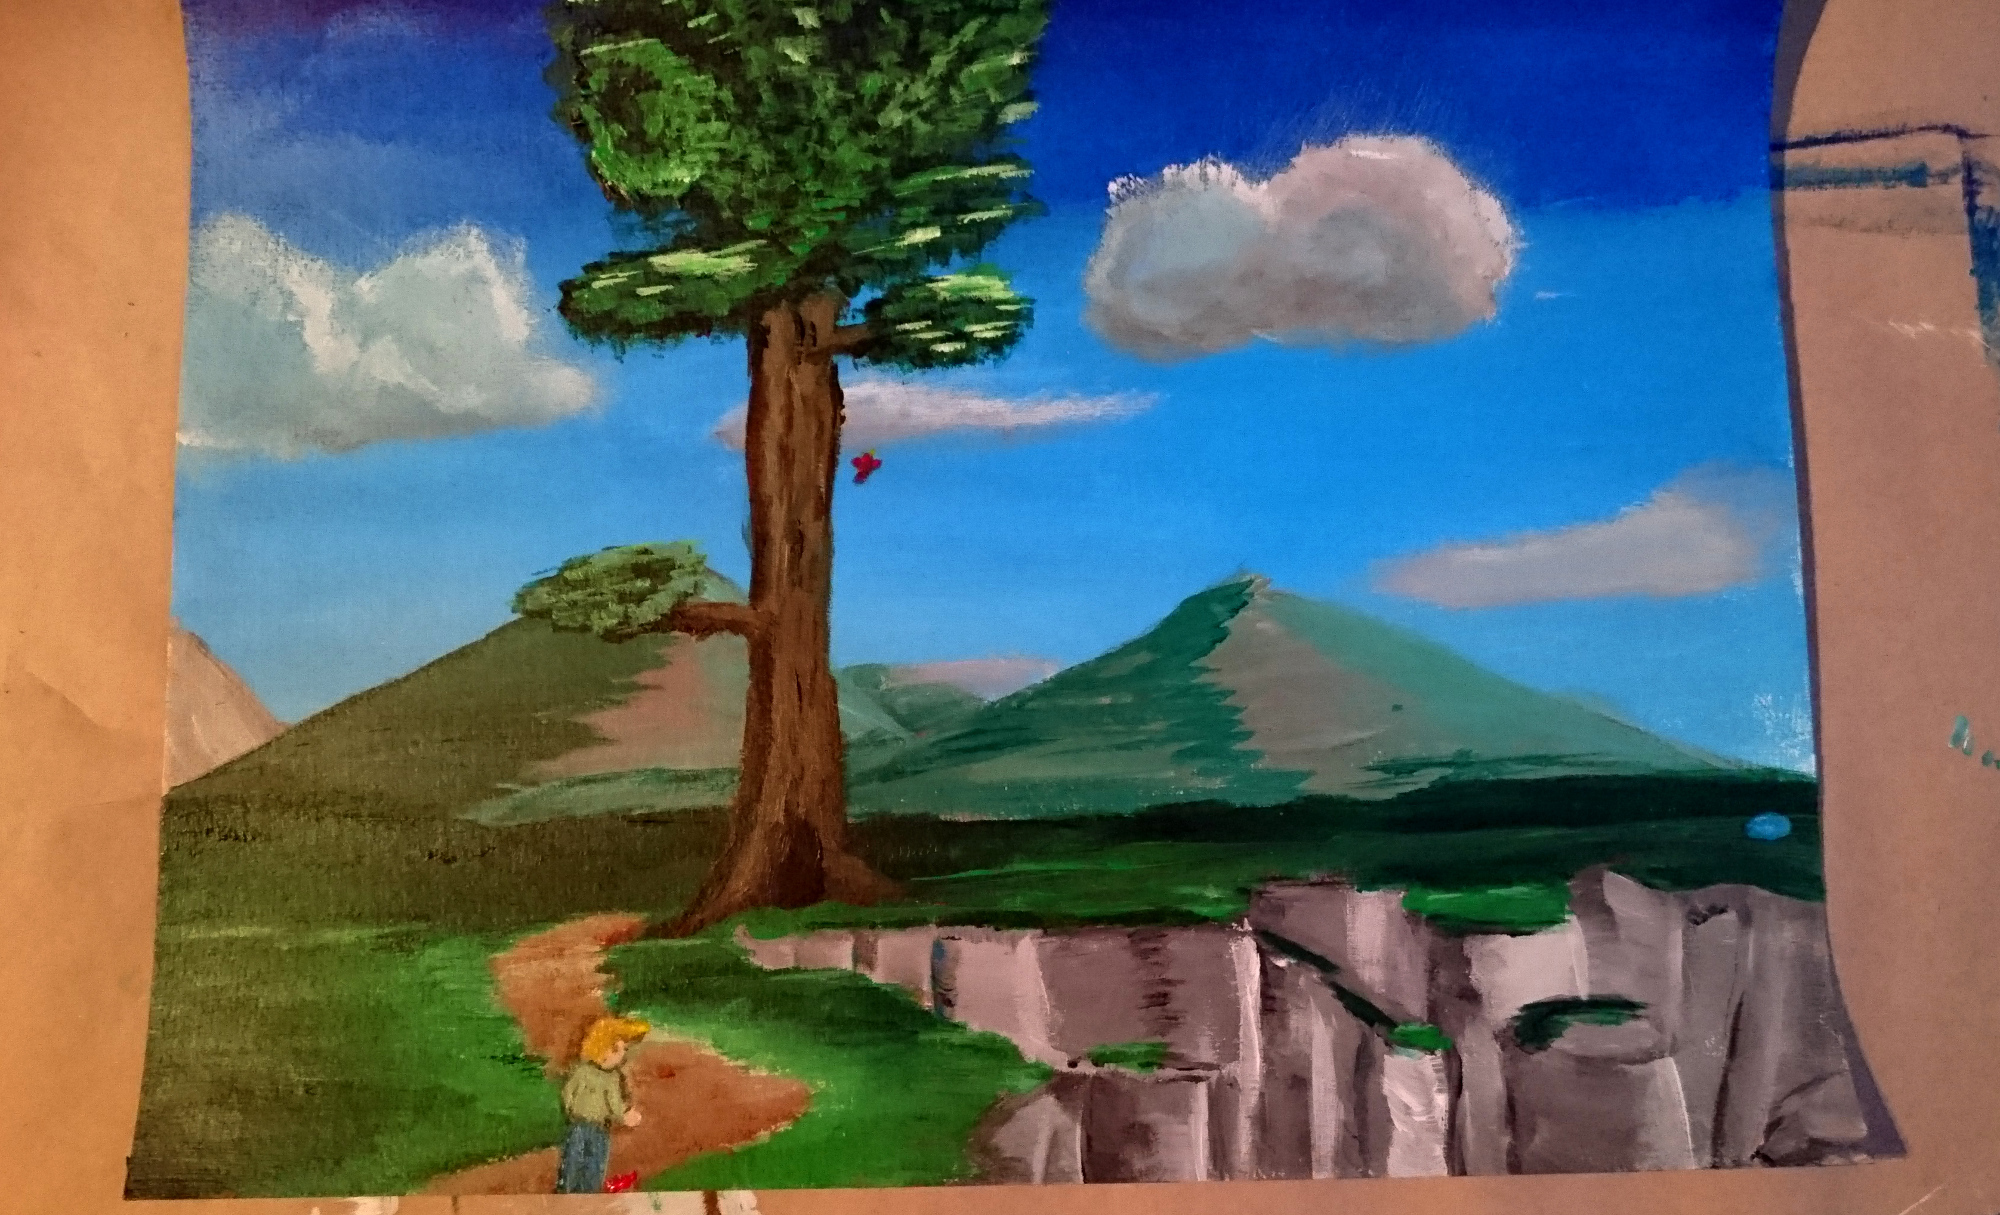 Terraria inspired painting